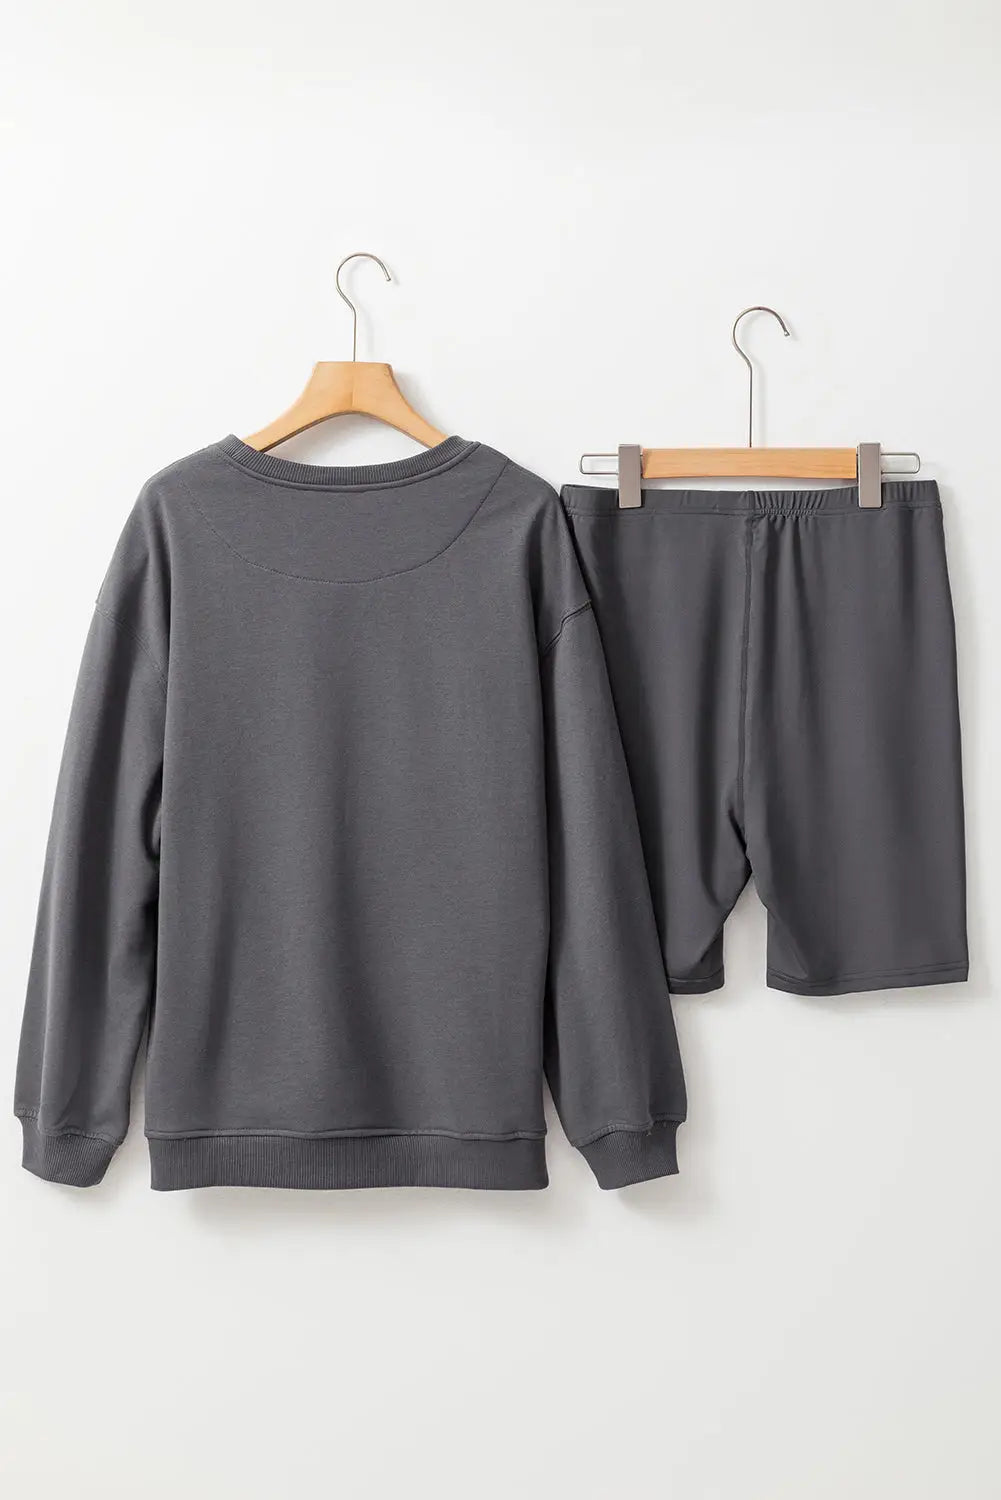 Dark grey solid color pullover and skinny shorts two piece set - loungewear